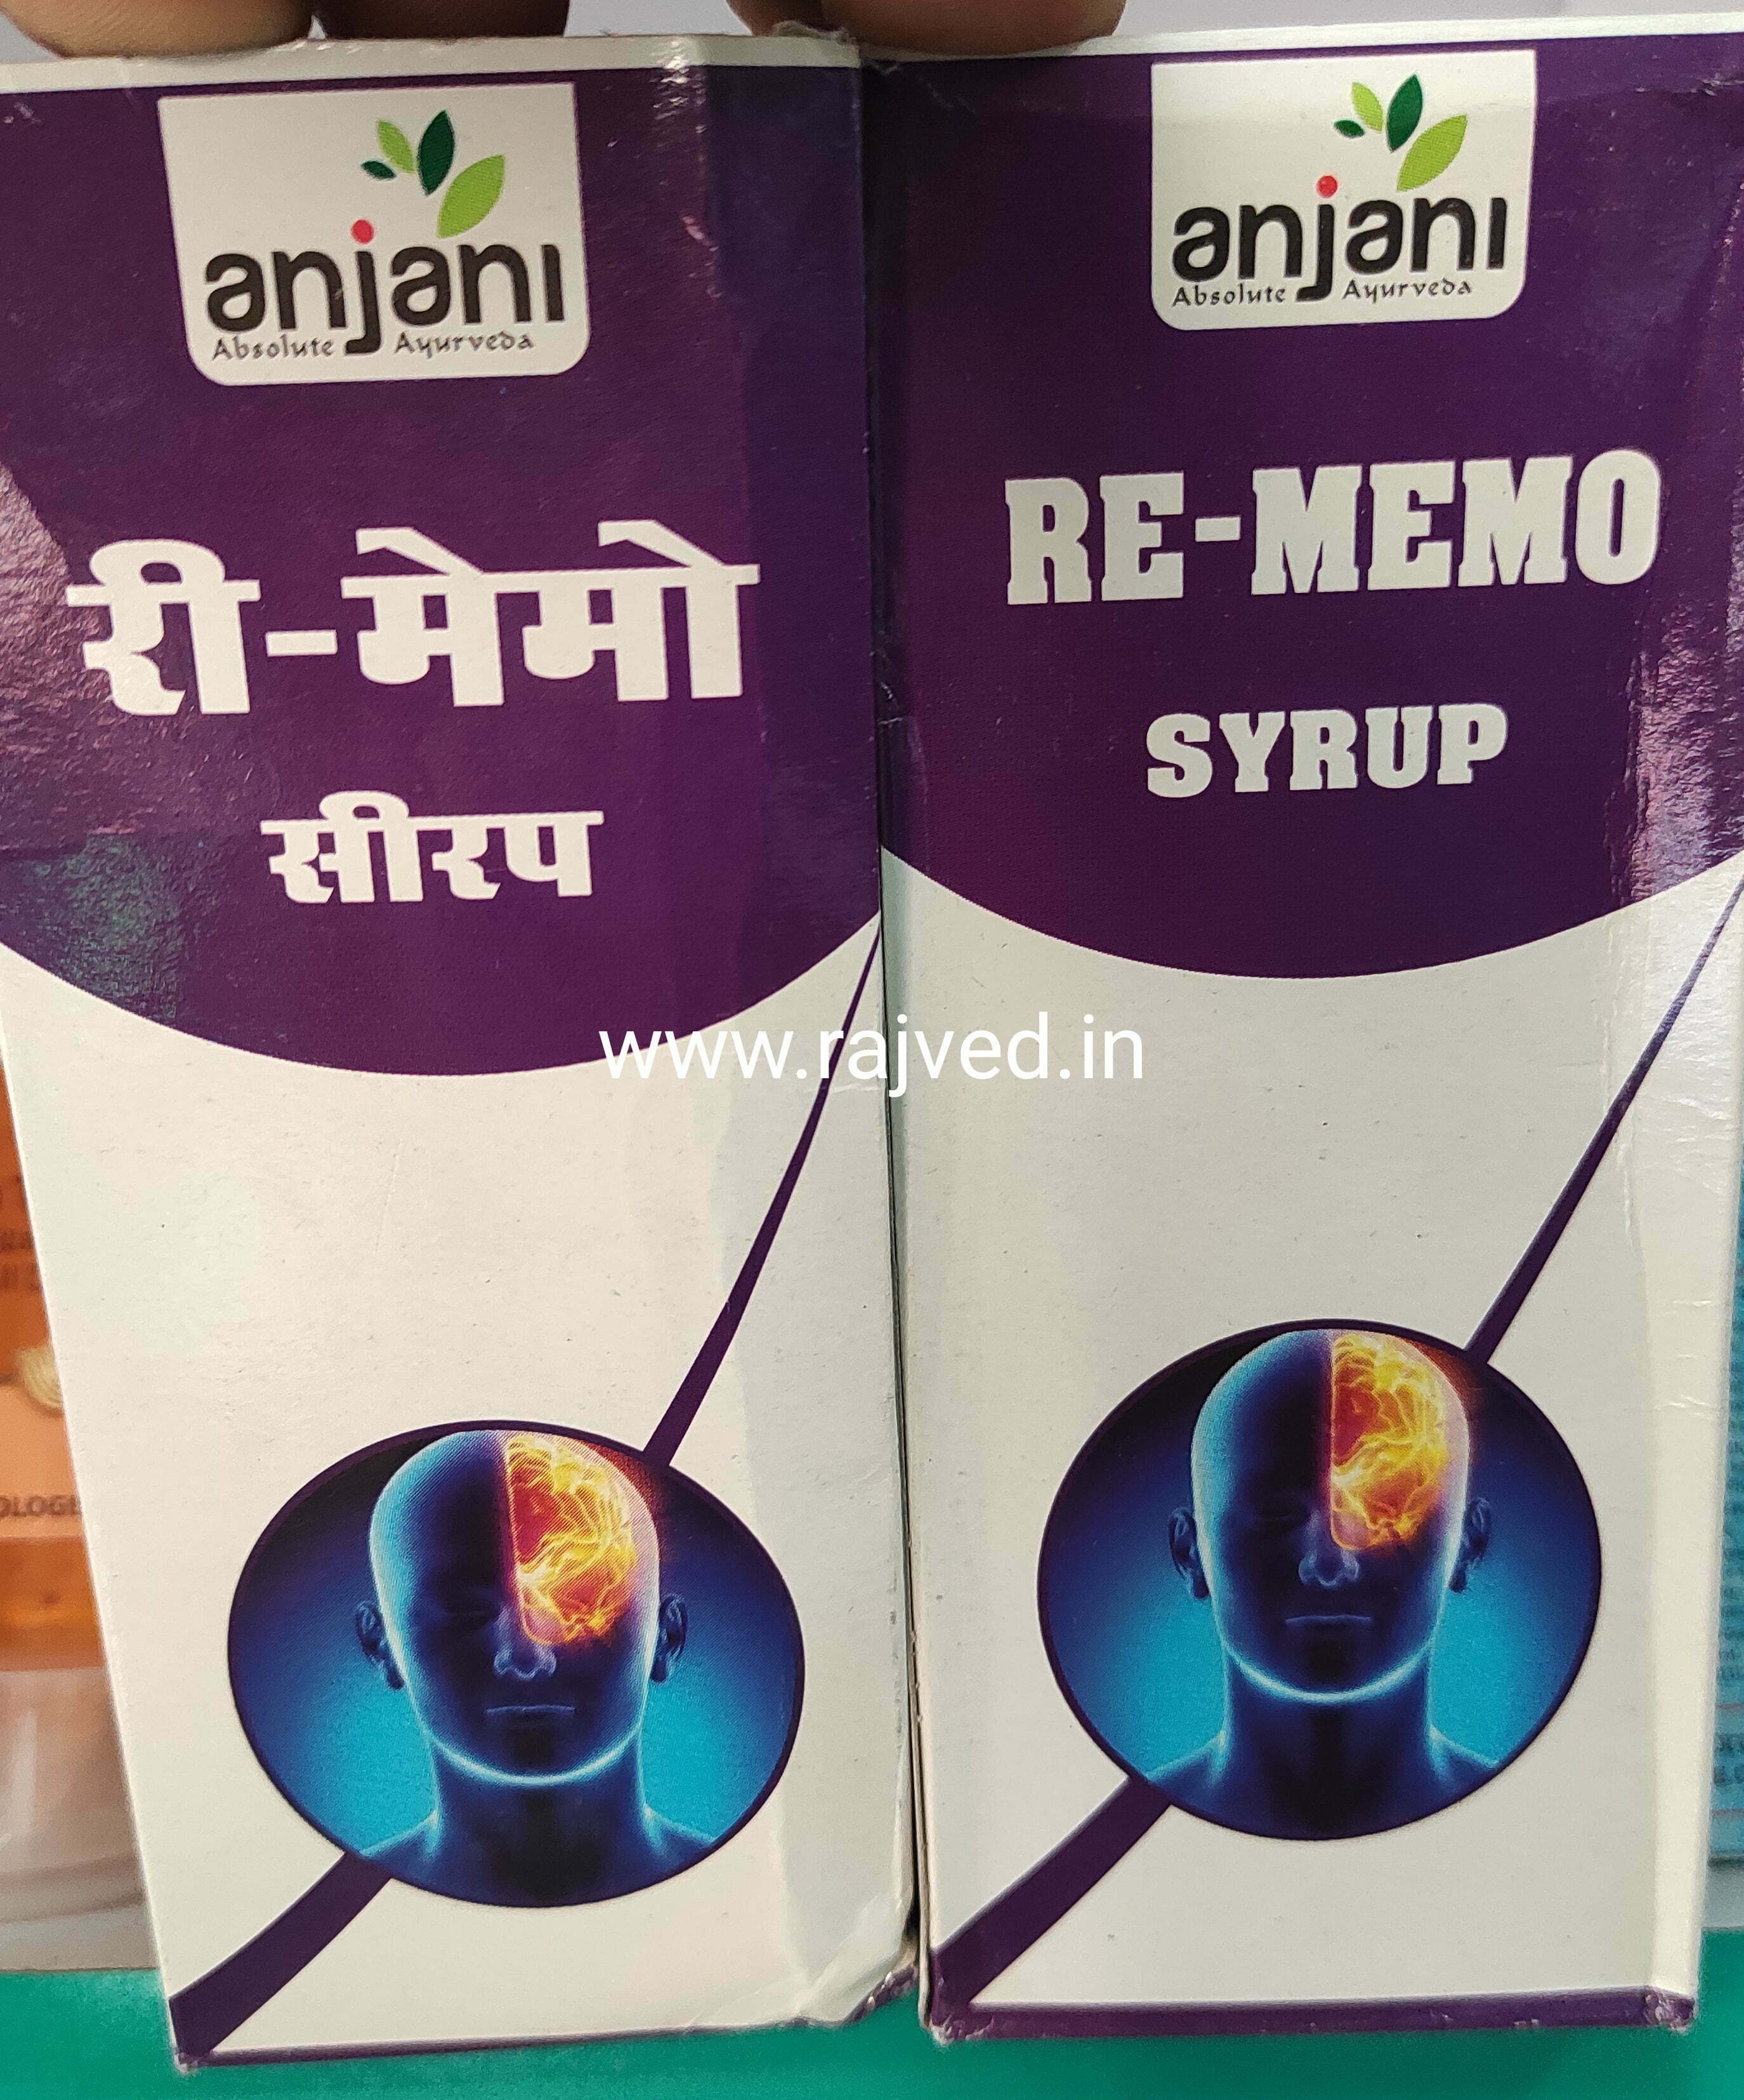 Re-Memo syrup 400 ml upto 20% off Anjani Pharmaceuticals